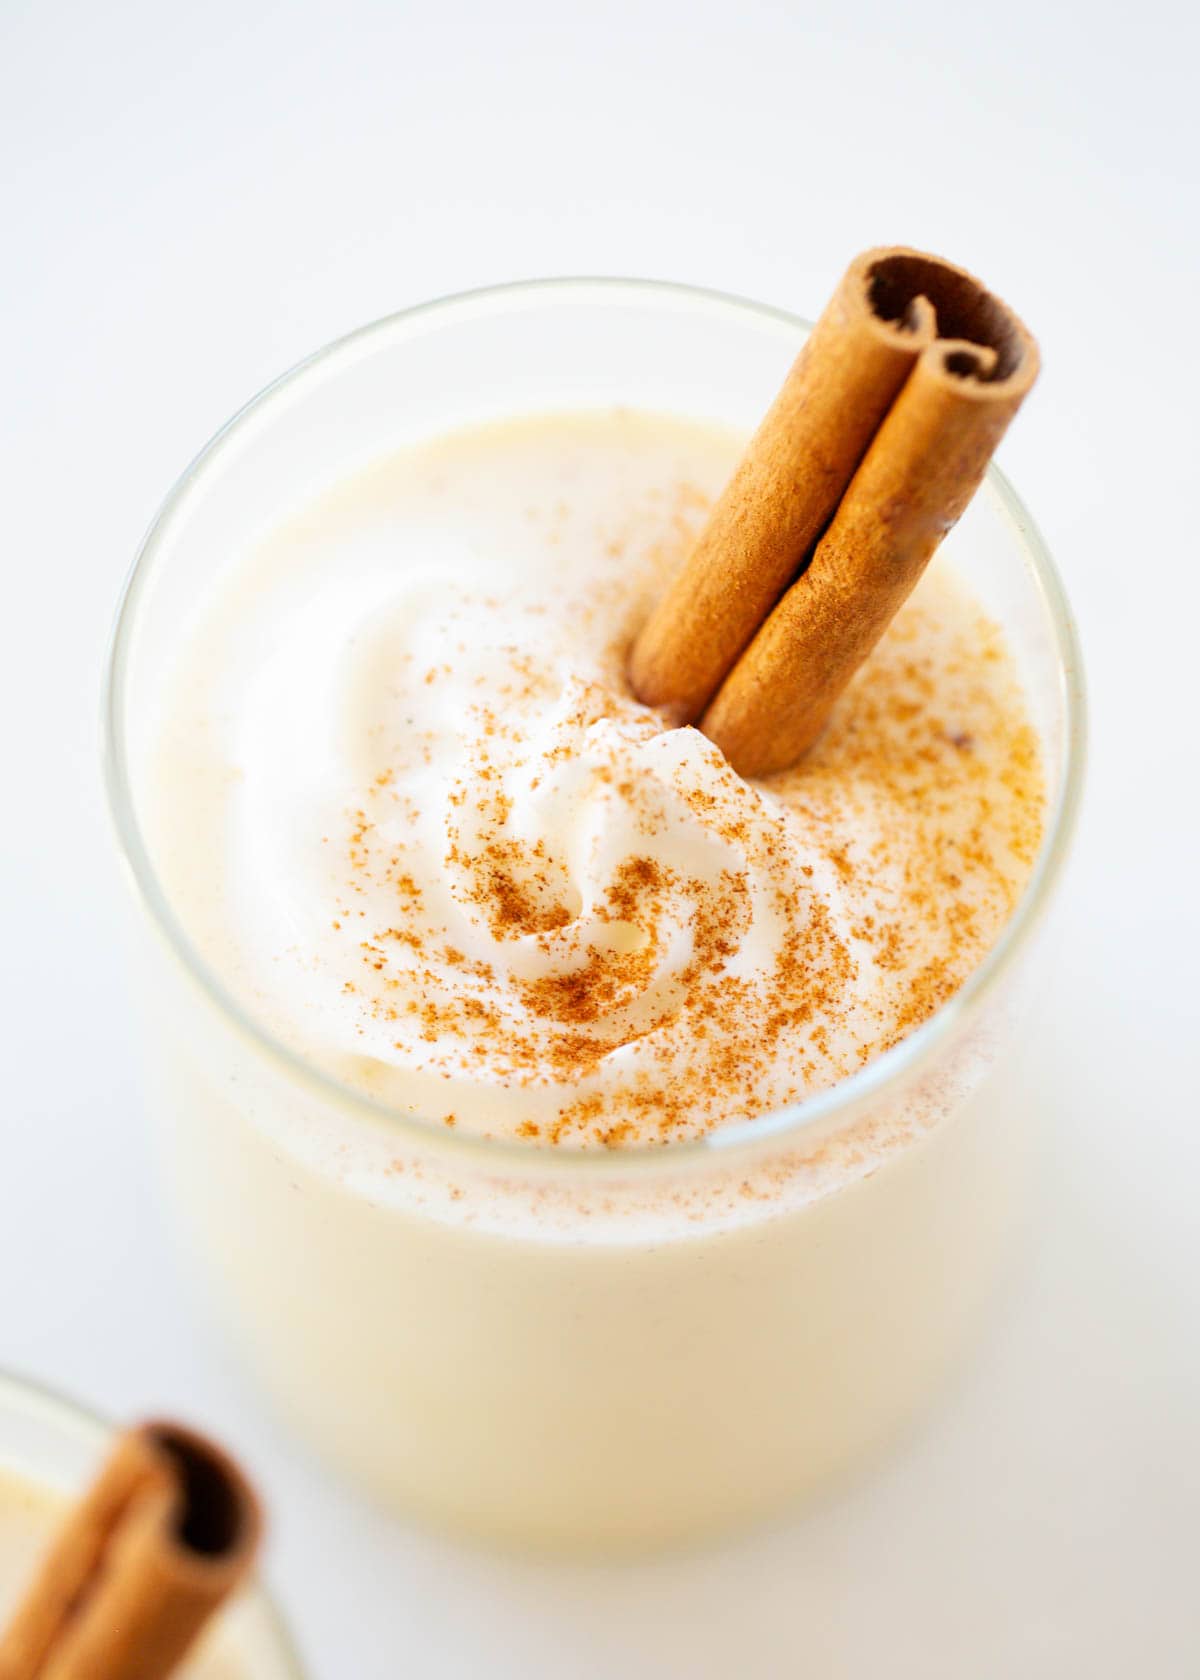 Eggnog in a cup with a cinnamon stick.